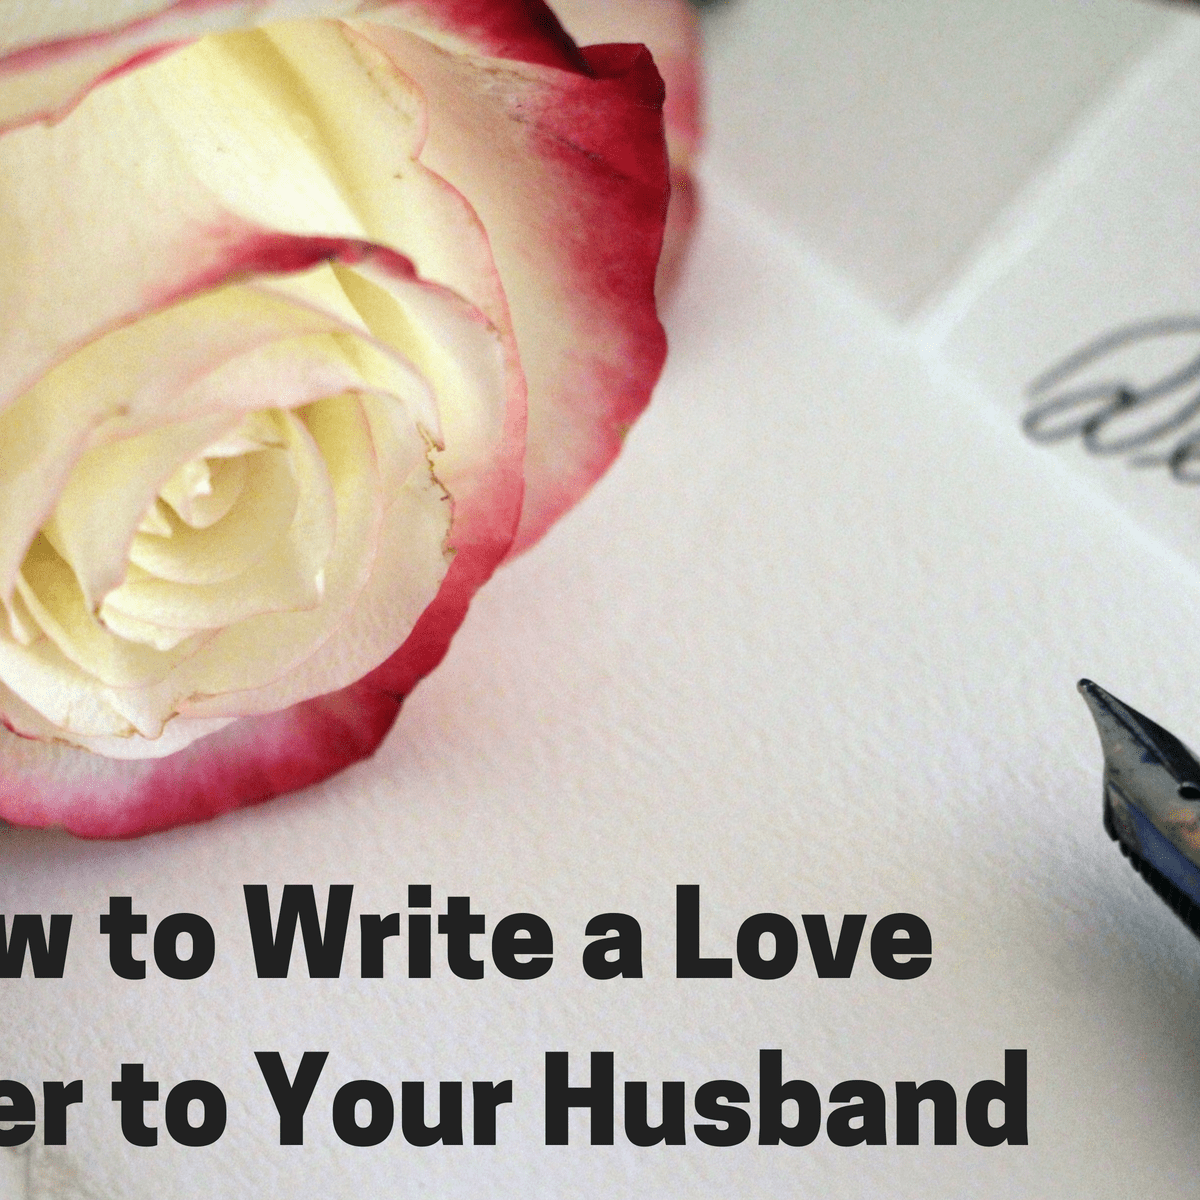 26 Sample Love Letters to Your Husband or Boyfriend - PairedLife